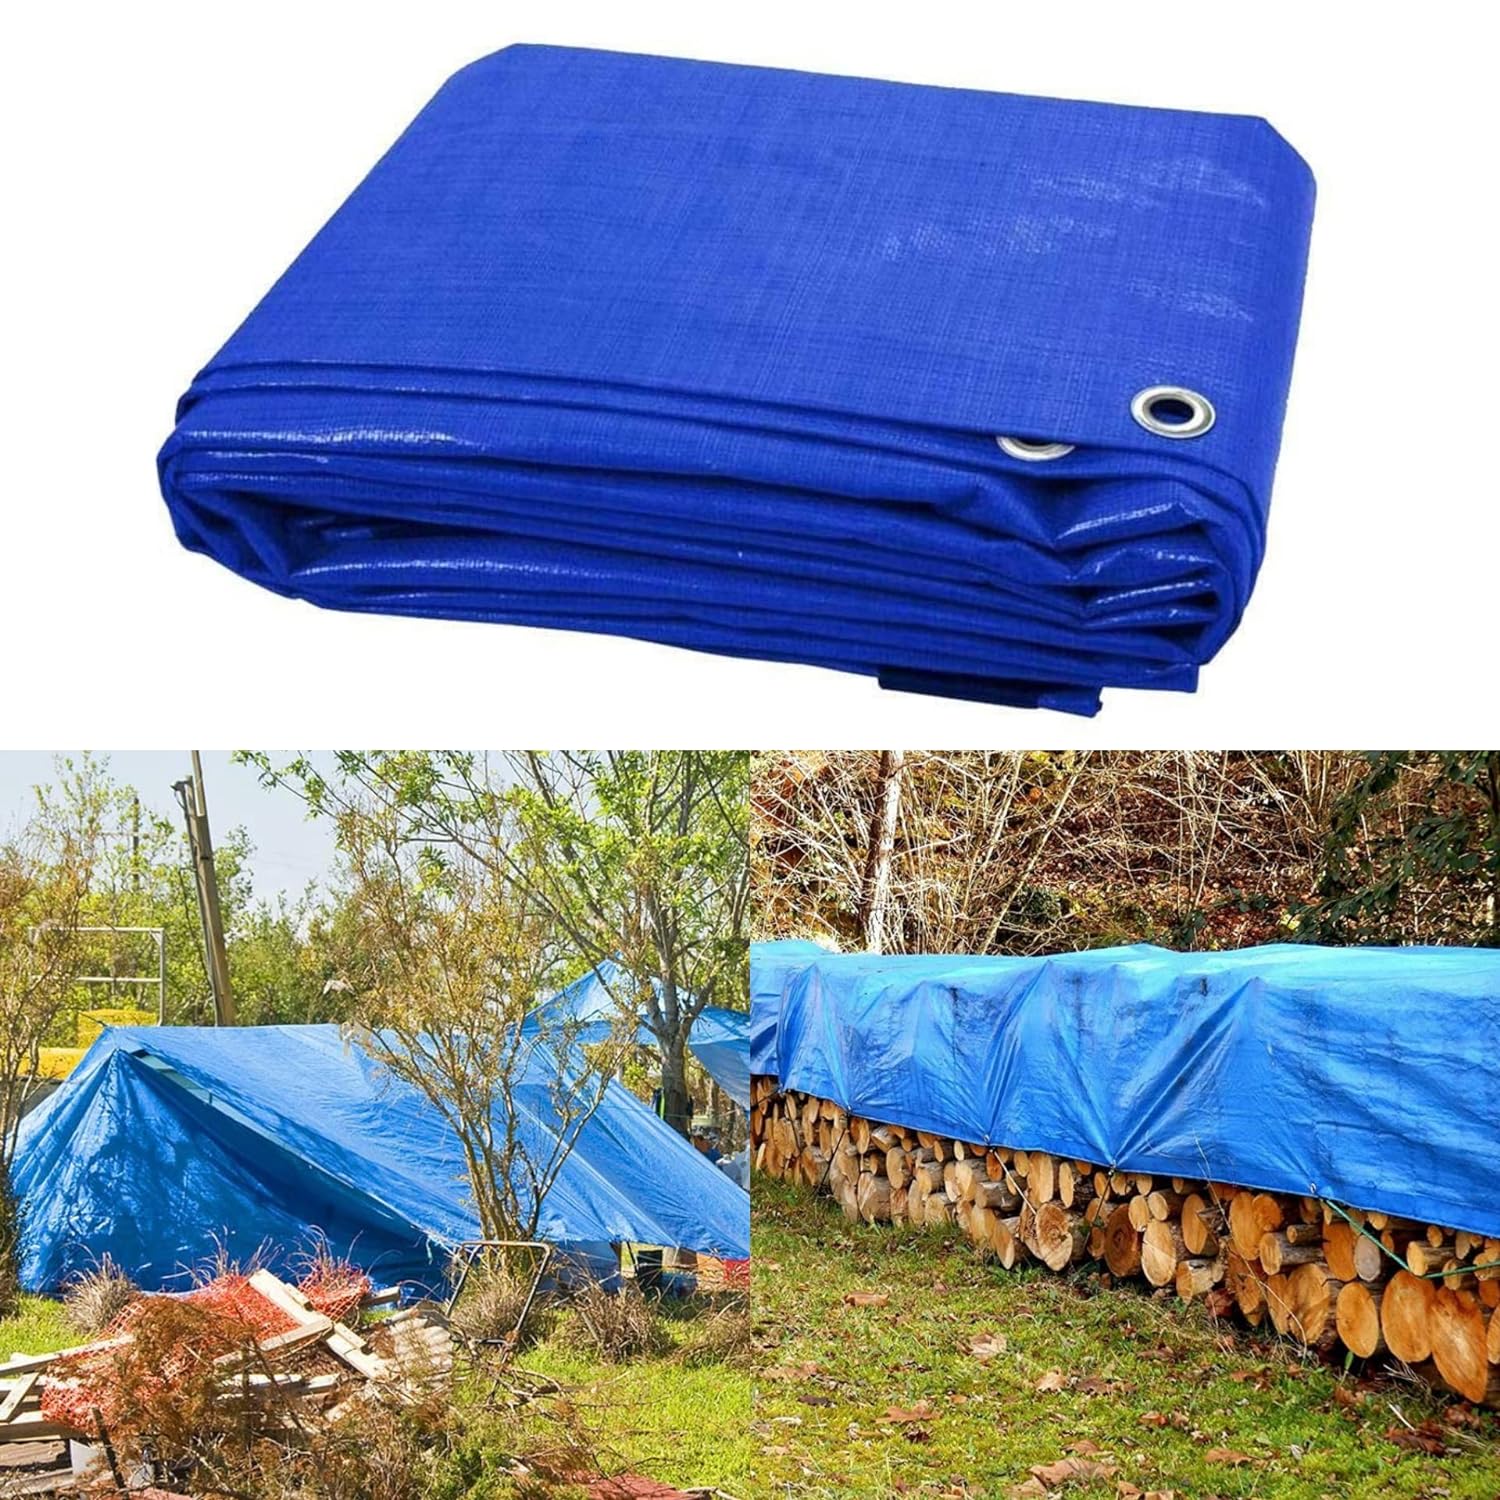 ADEPTNA Heavy-Duty Tarpaulin water-resistant Cover Tarp Professional Ground Camping Sheet - Strong Polypropylene Durability and Tear resistance (5 x 8 metres)